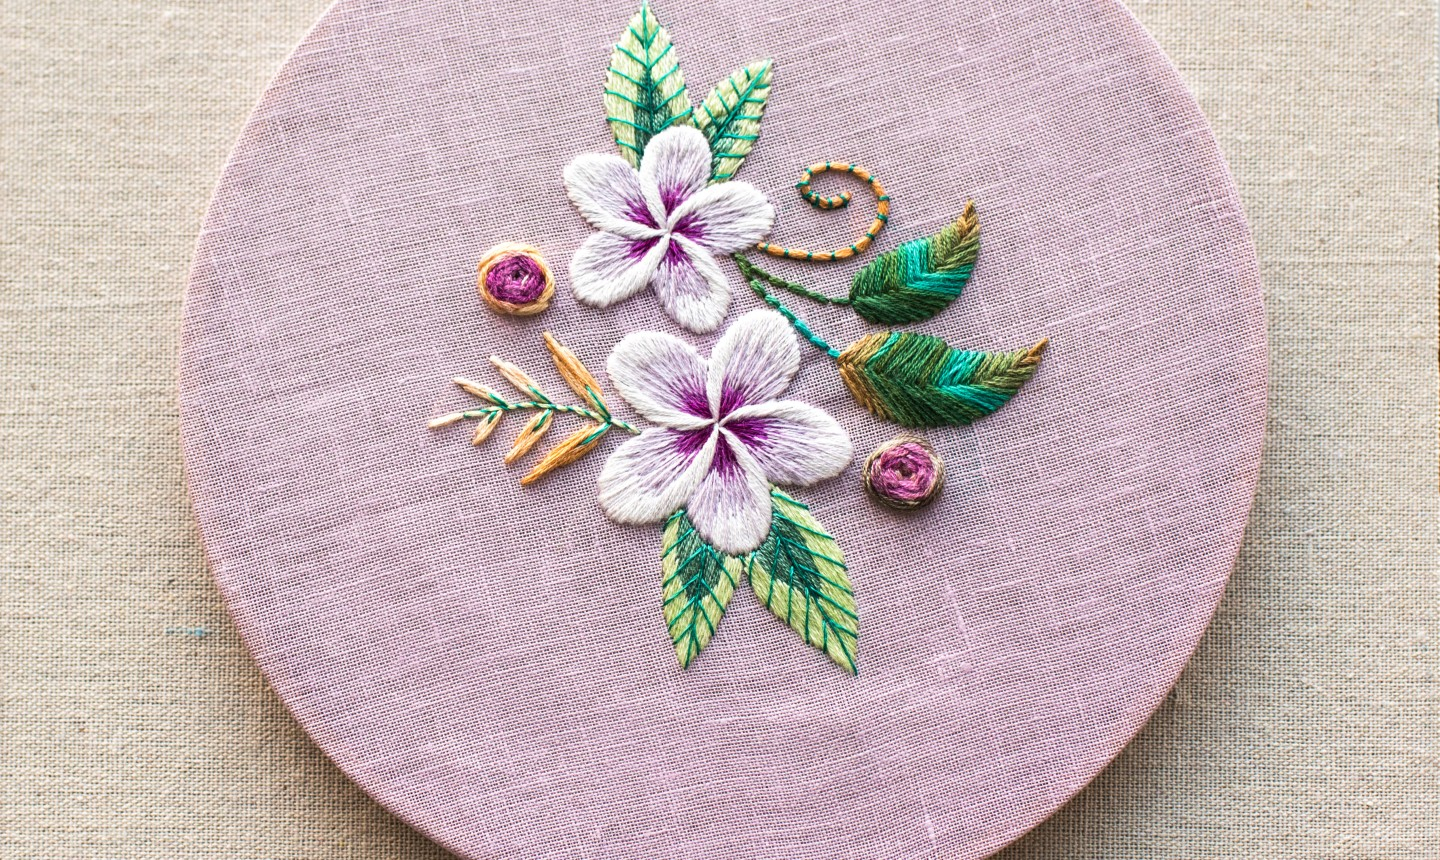 Hand Embroidery Flowers Patterns 7 Beautiful Ways To Hand Embroider Flowers